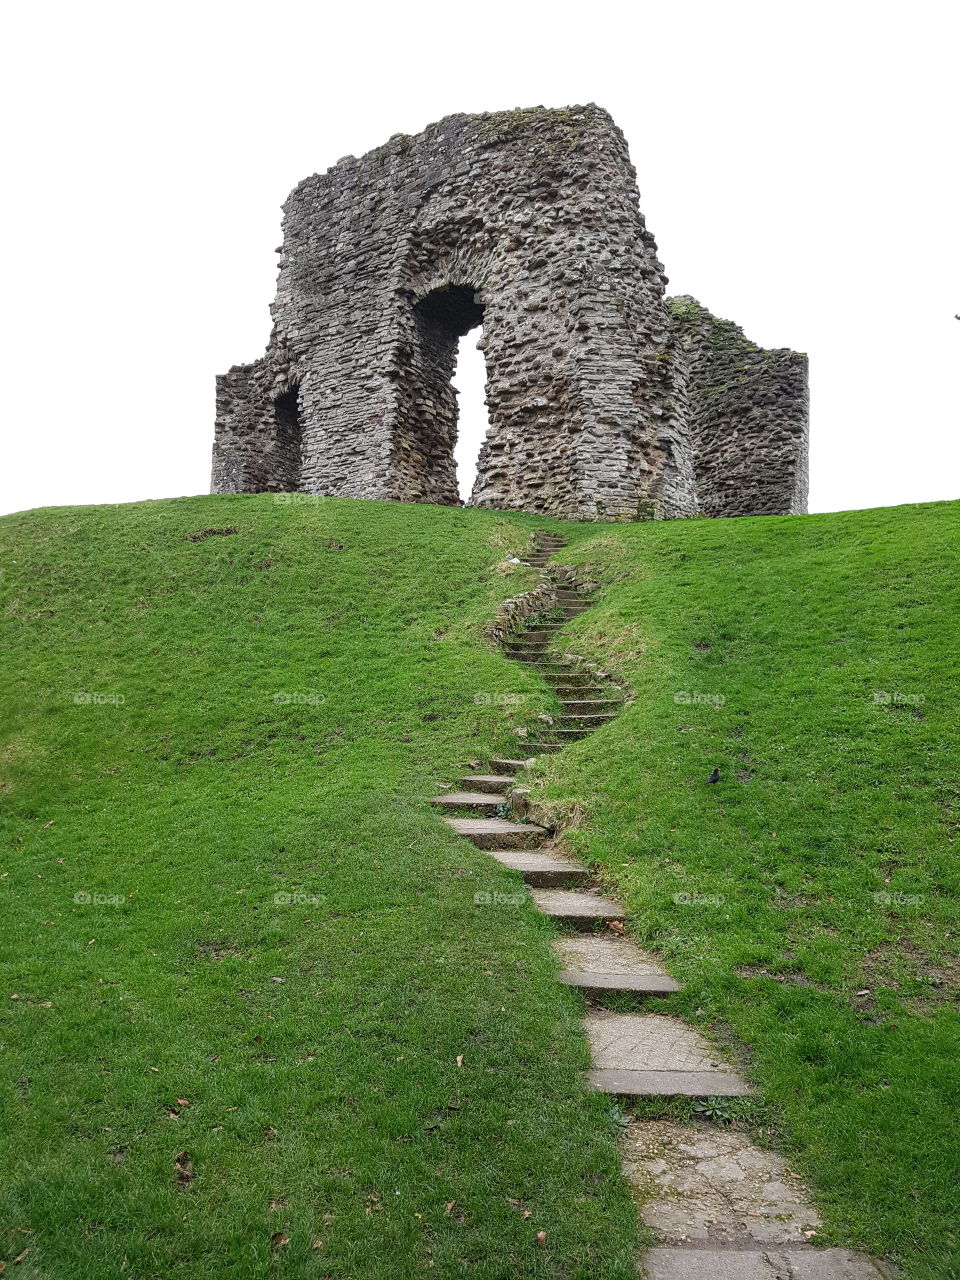 winding steps leading up to the castle ruin